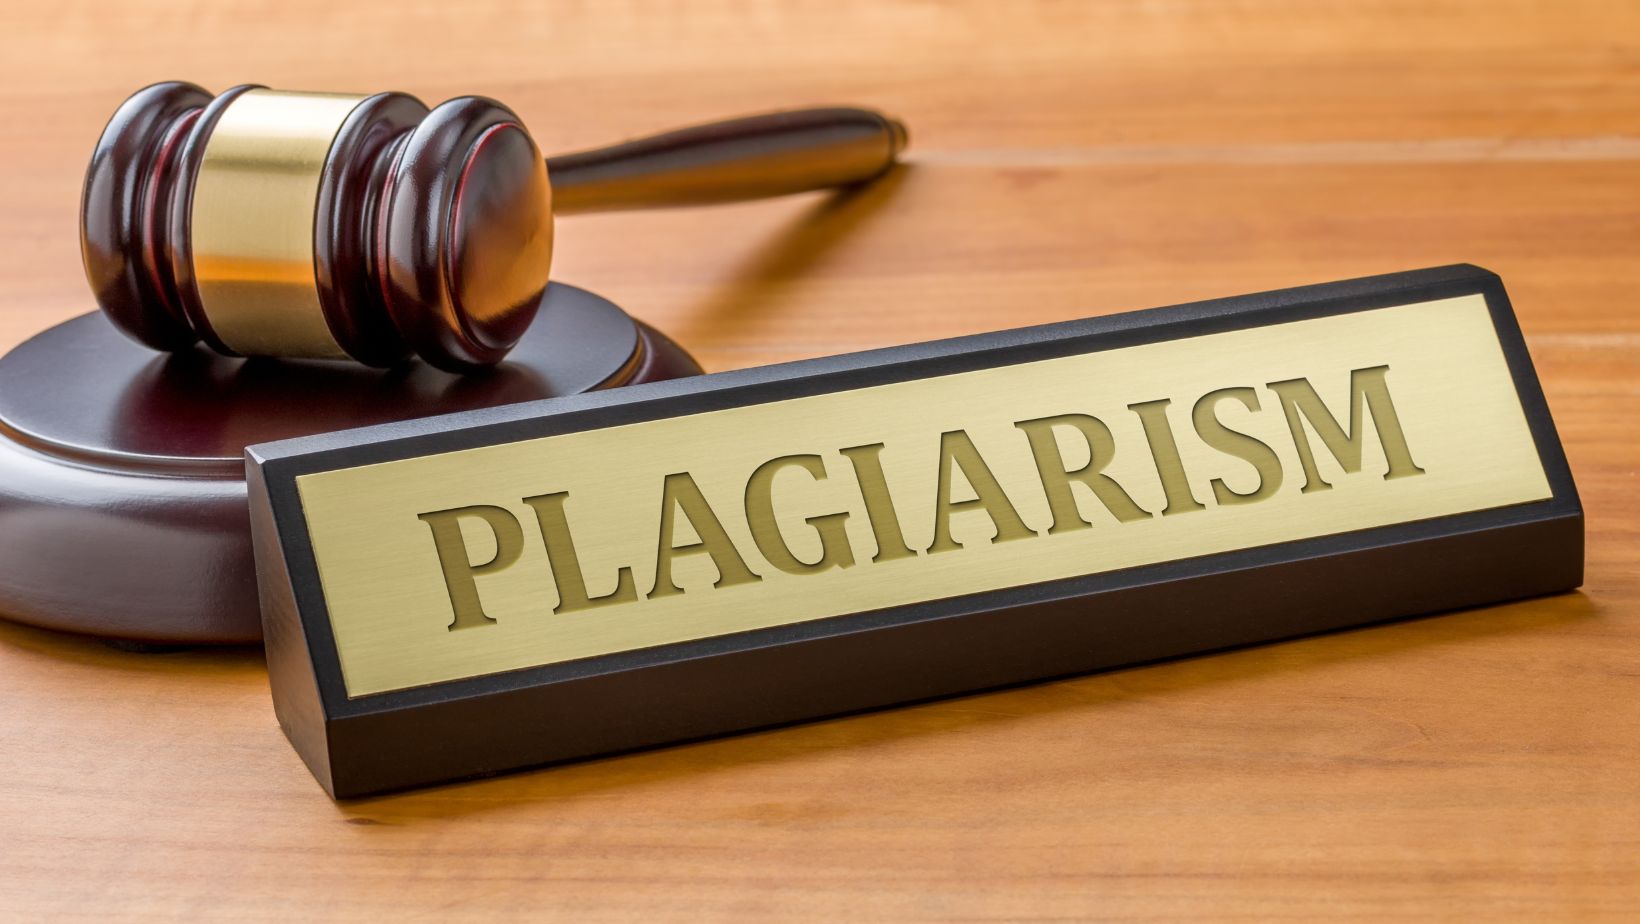 which of the following represents plagiarism?